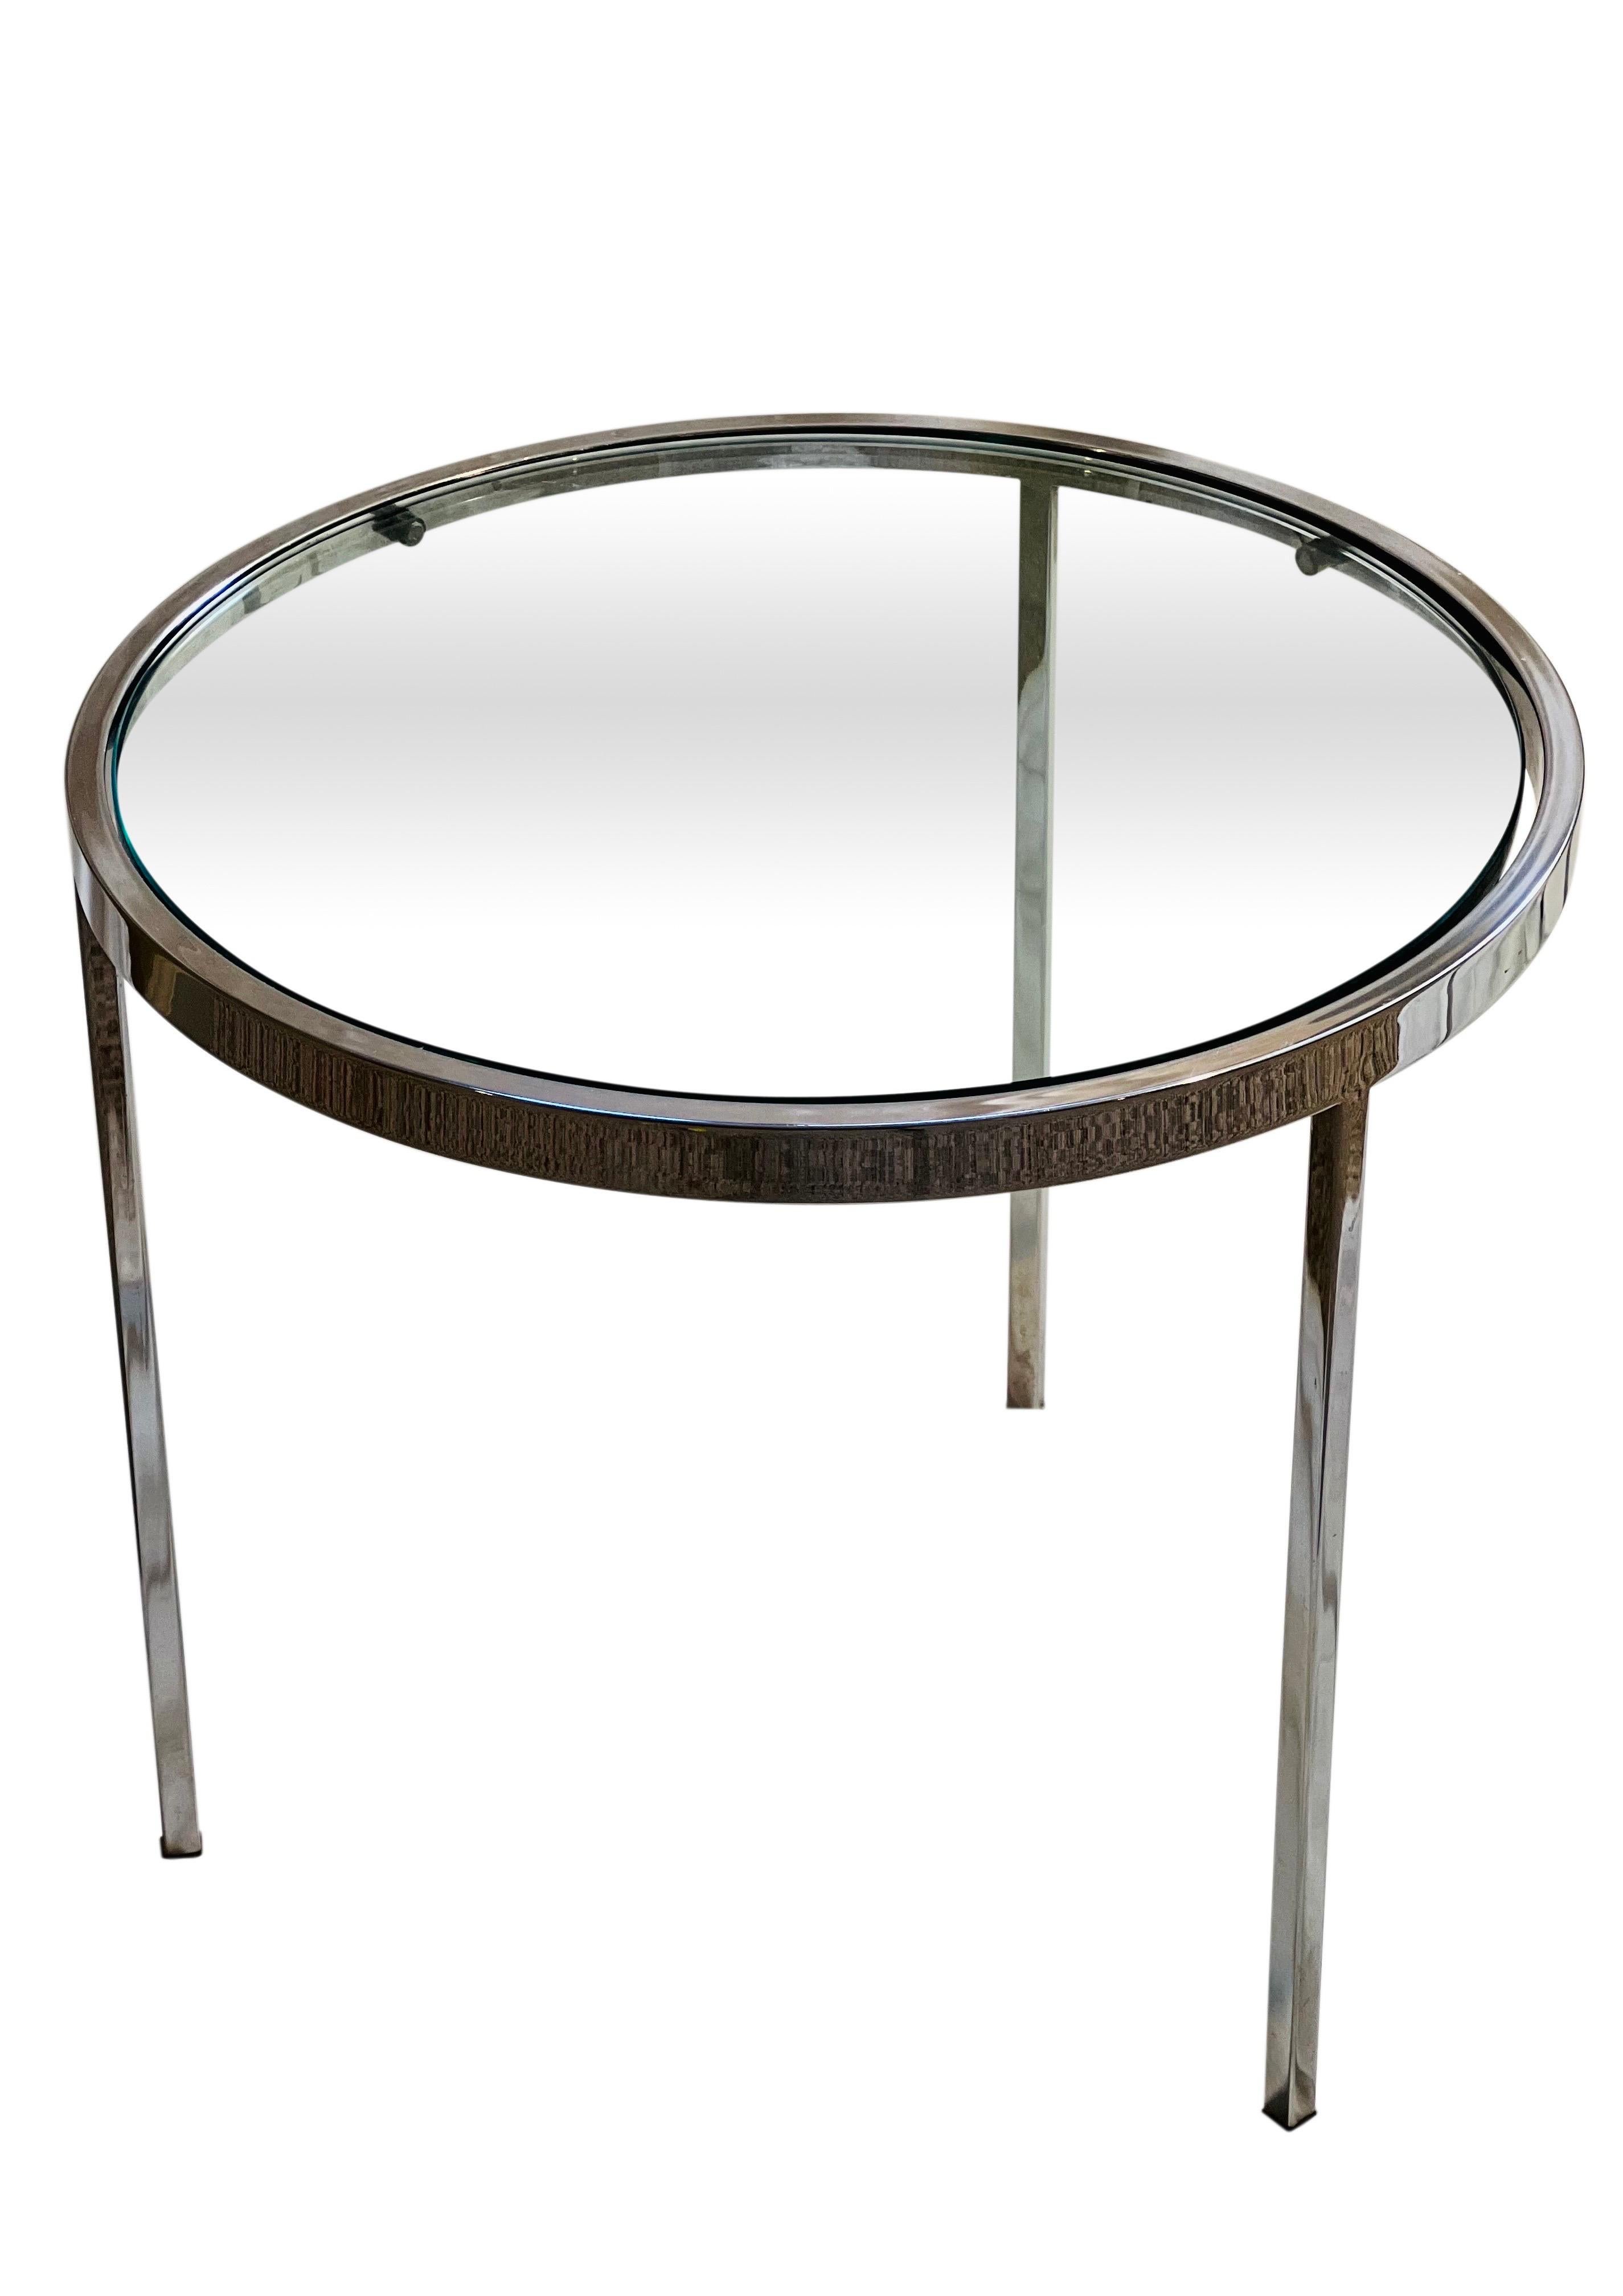 American Milo Baughman Flat Bar Chrome and Glass Low Side Tables, Pair